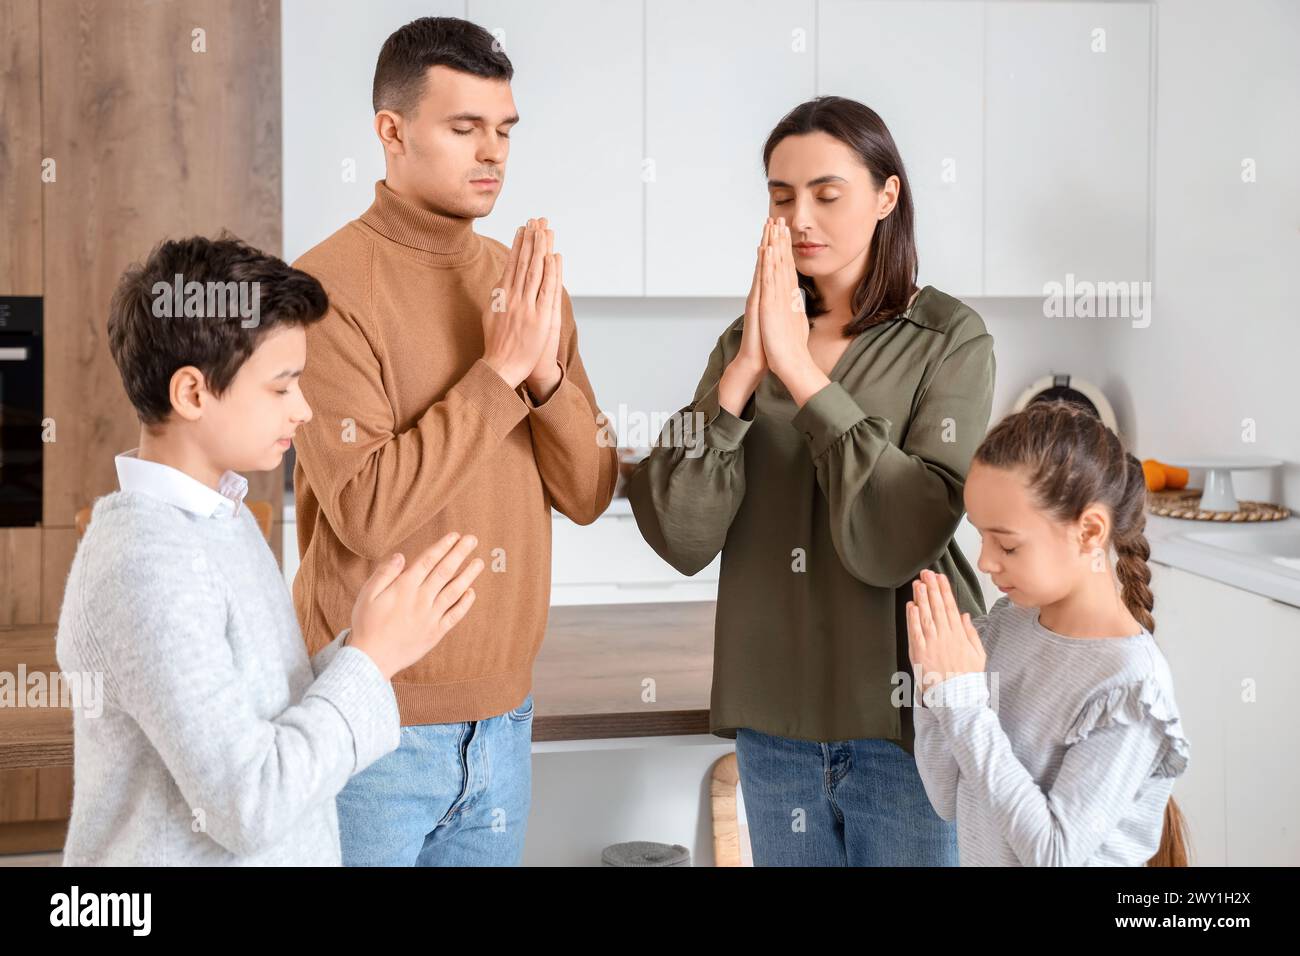 Family praying together in kitchen Stock Photo